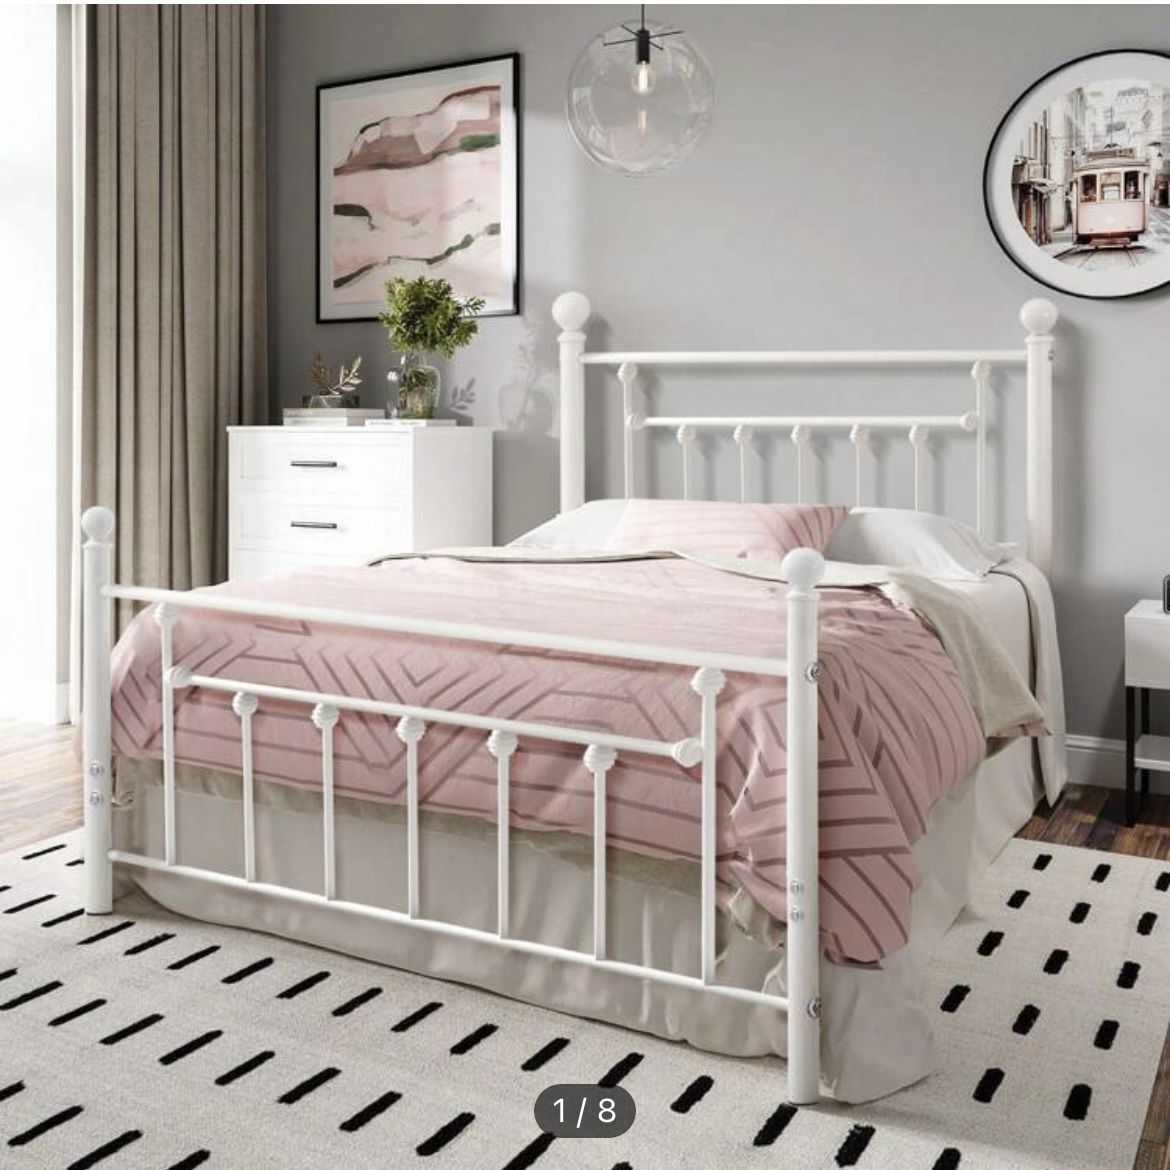 Bed frame - White (Queen)- Price 50$